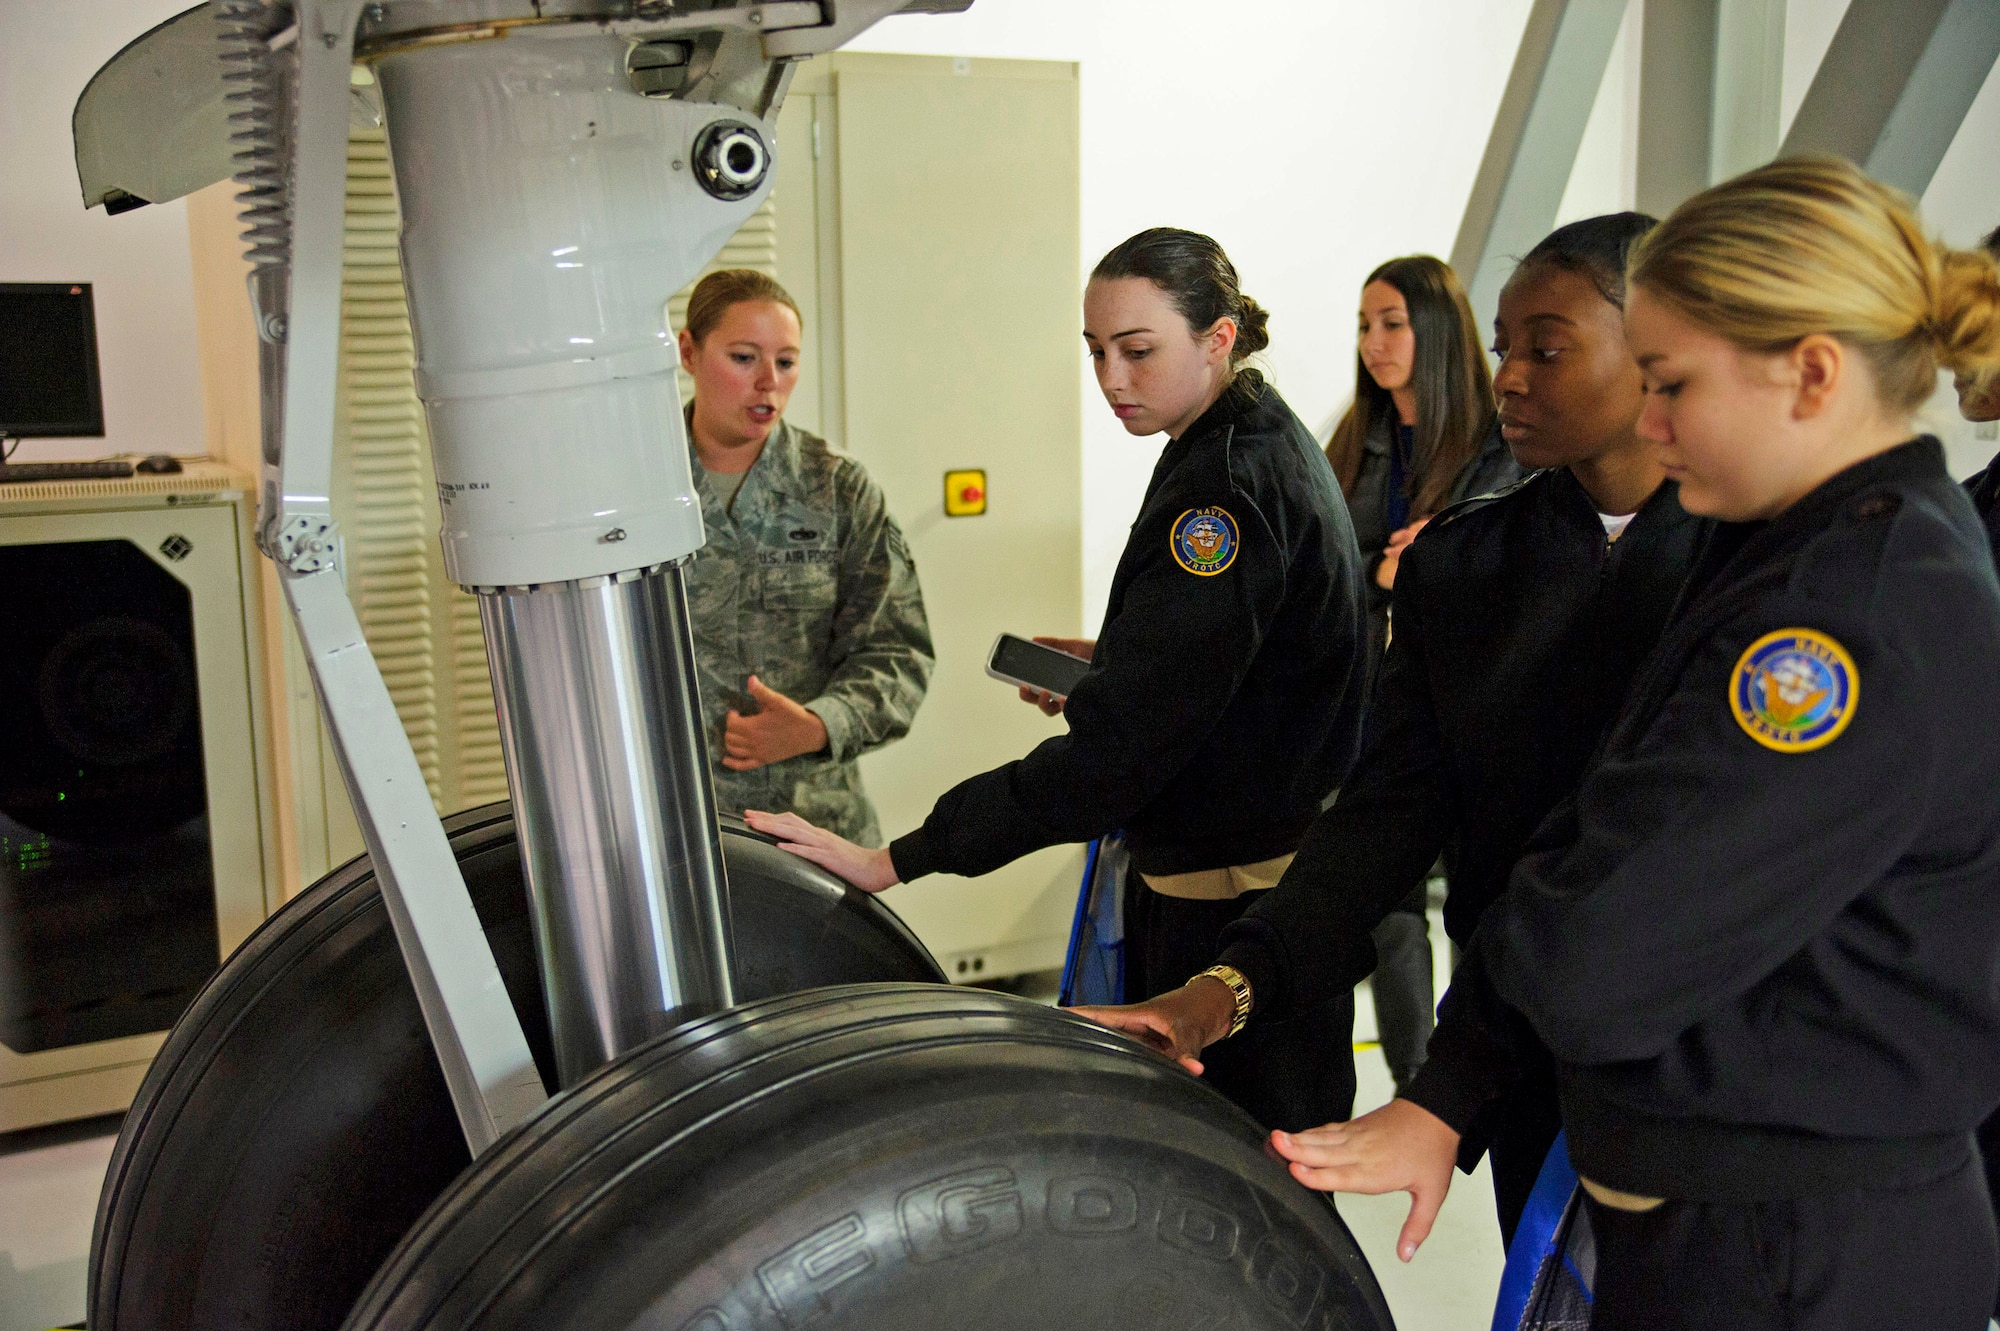 While visiting the 373rd Training Squadron Det. 5 local girls were given the opportunity to see and touch stand-alone "Hot Mockup" components of all the key components of the C-17 Globemaster III. Over 130 middle and high school girls from 12 Lowcountry schools visited Joint Base Charleston March 22 to learn about jobs in aviation as part of the 315th Airlift Wing’s 9th annual Women in Aviation Career Day. (U.S. Air Force photo by Senior Airman Jonathan Lane)